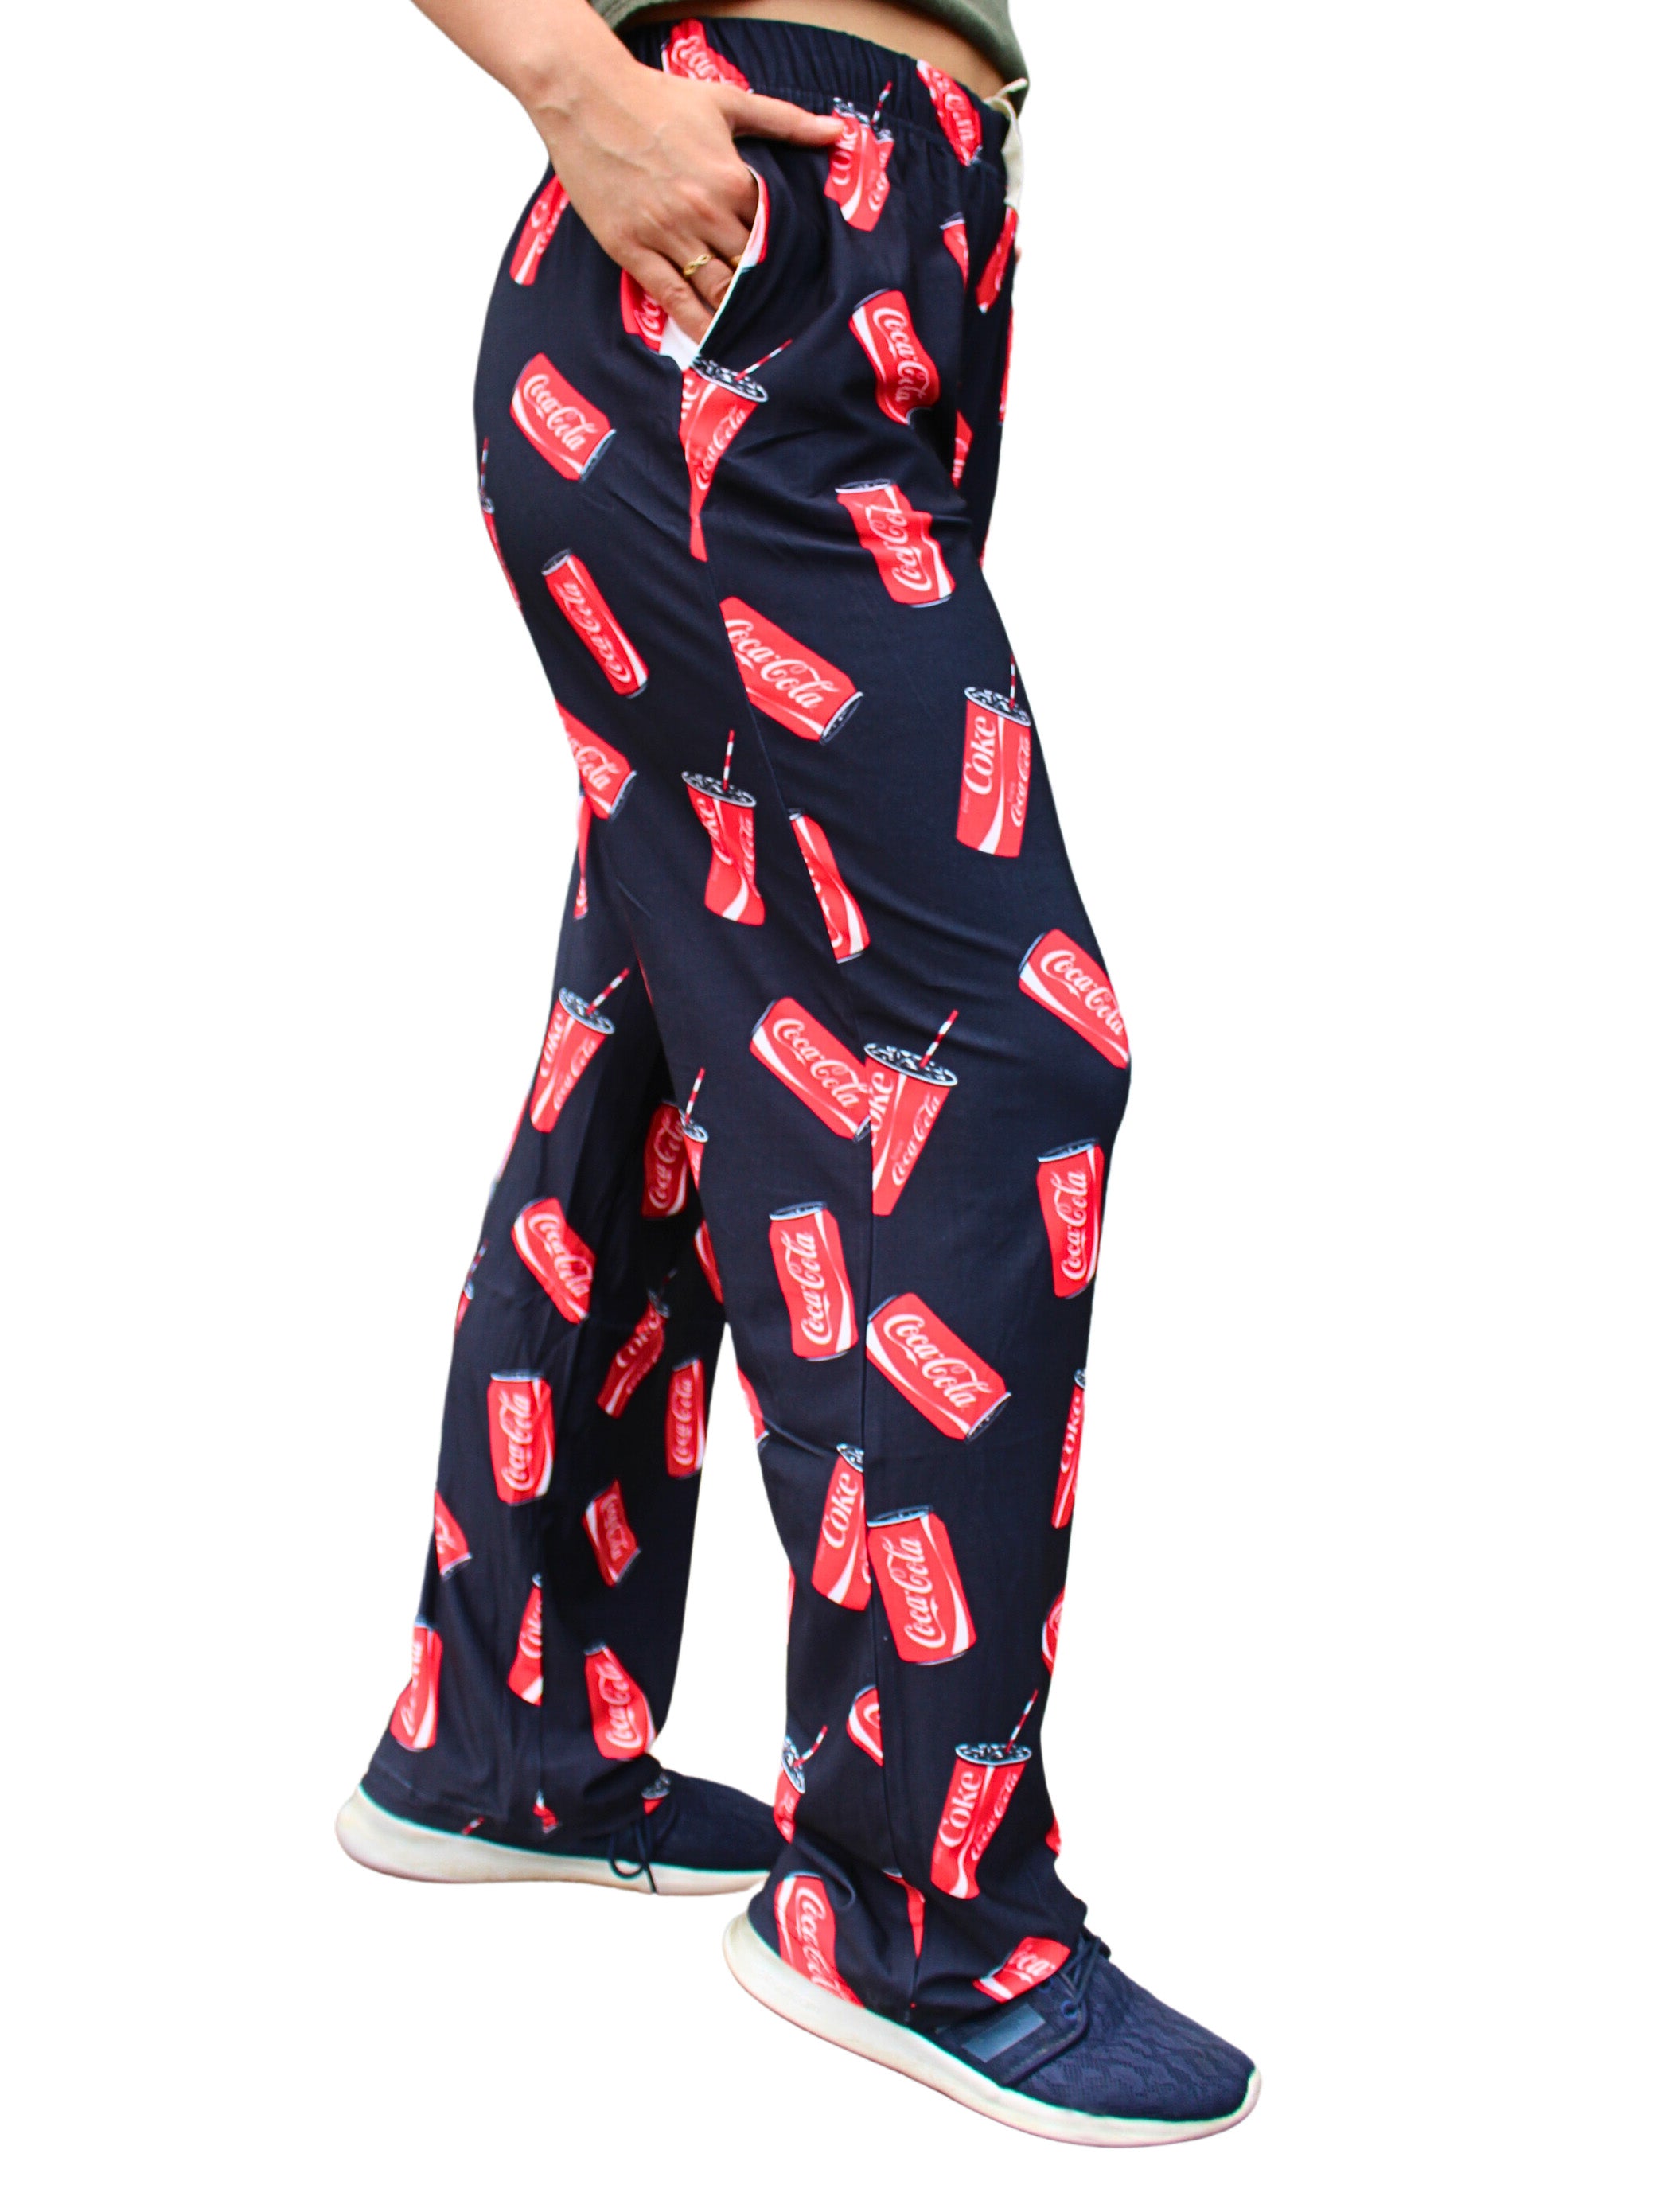 Coca-Cola Can & Cup Pattern Pajama Lounge Pants on model right side view shot 2